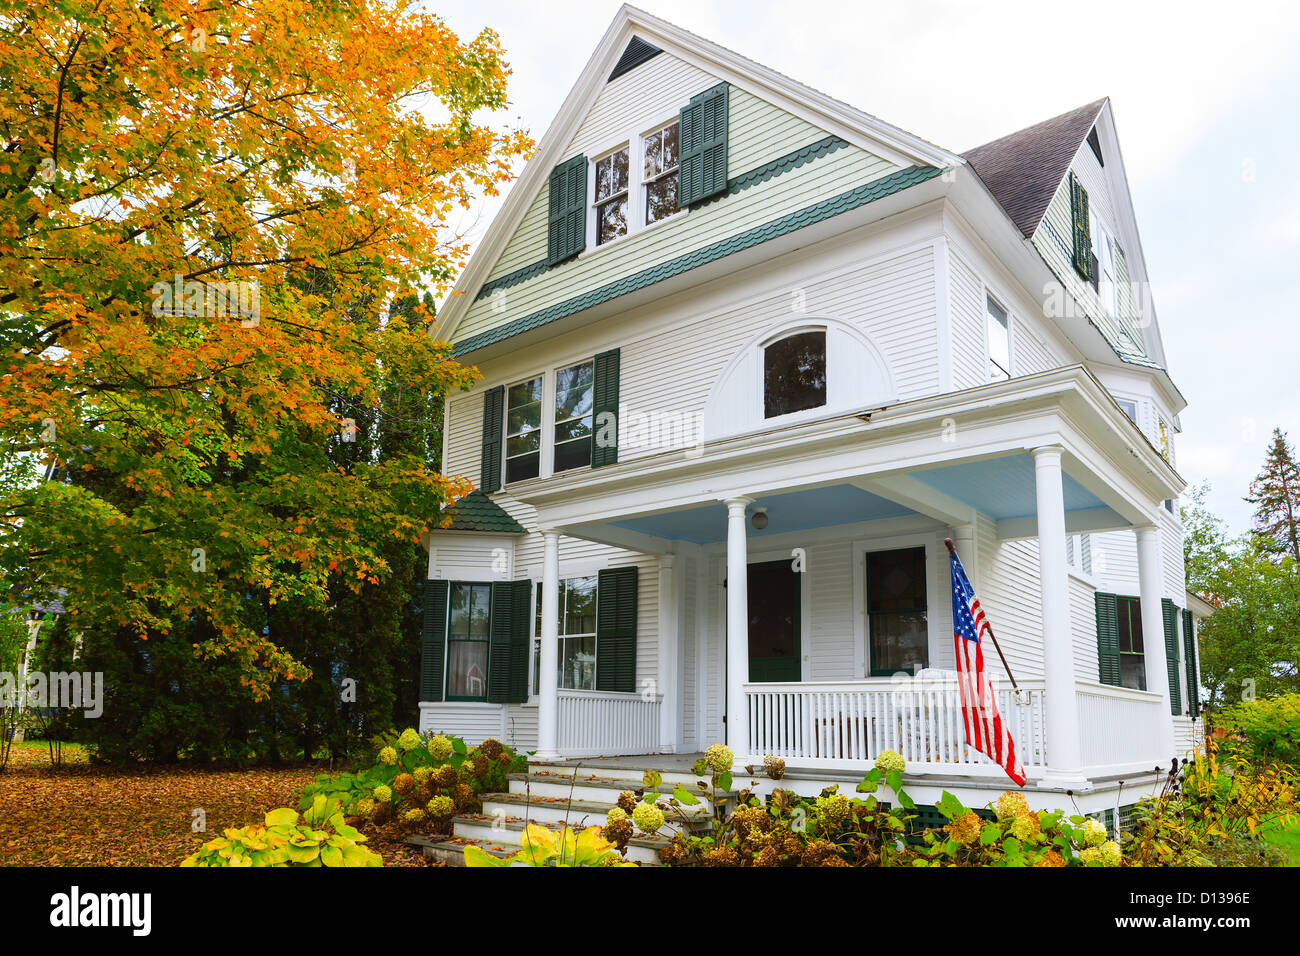 Typical New England home in Stowe, Vermont, United States Stock Photo